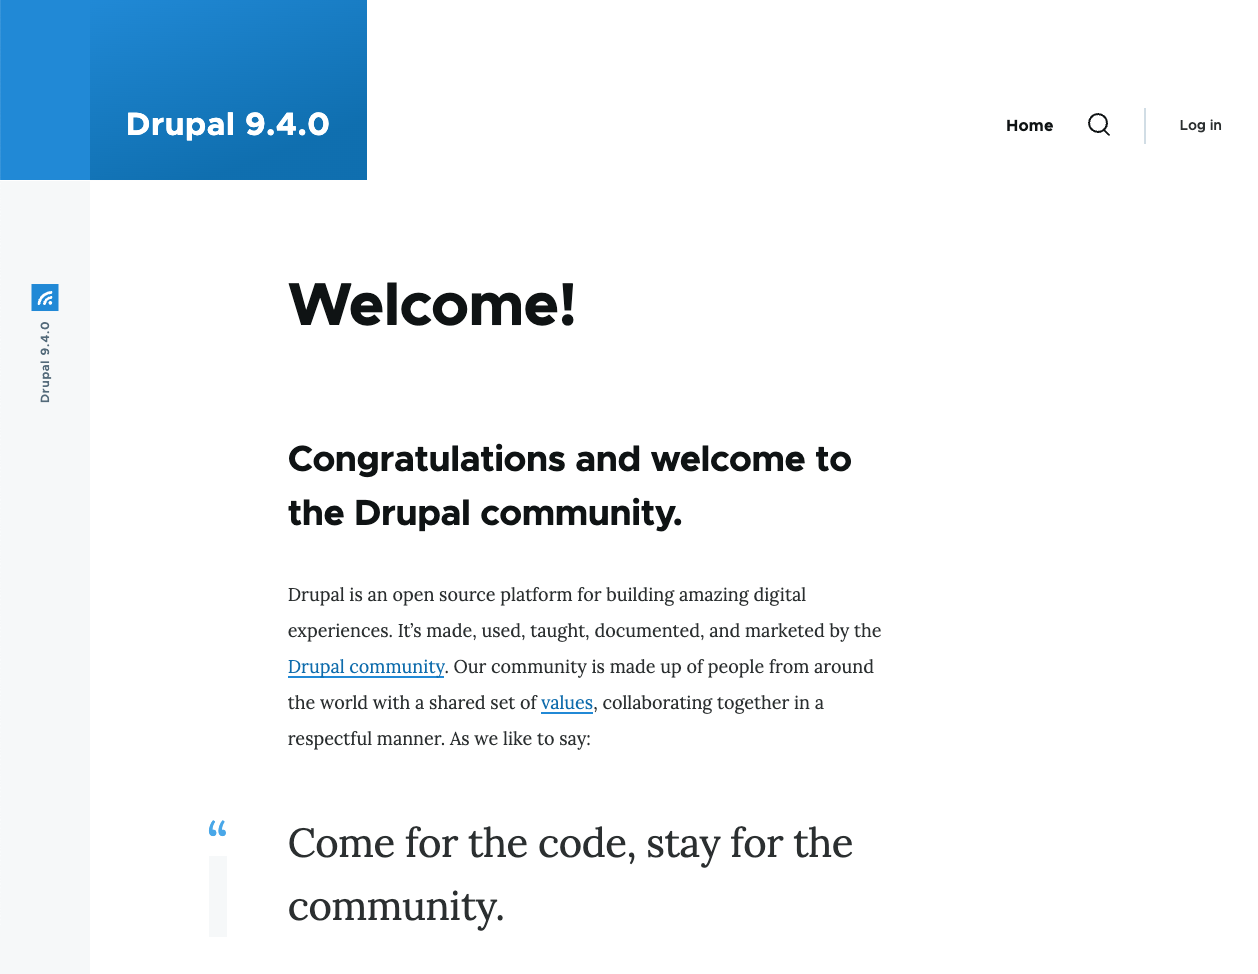 New Olivero start screen welcoming the site owner to the Drupal community